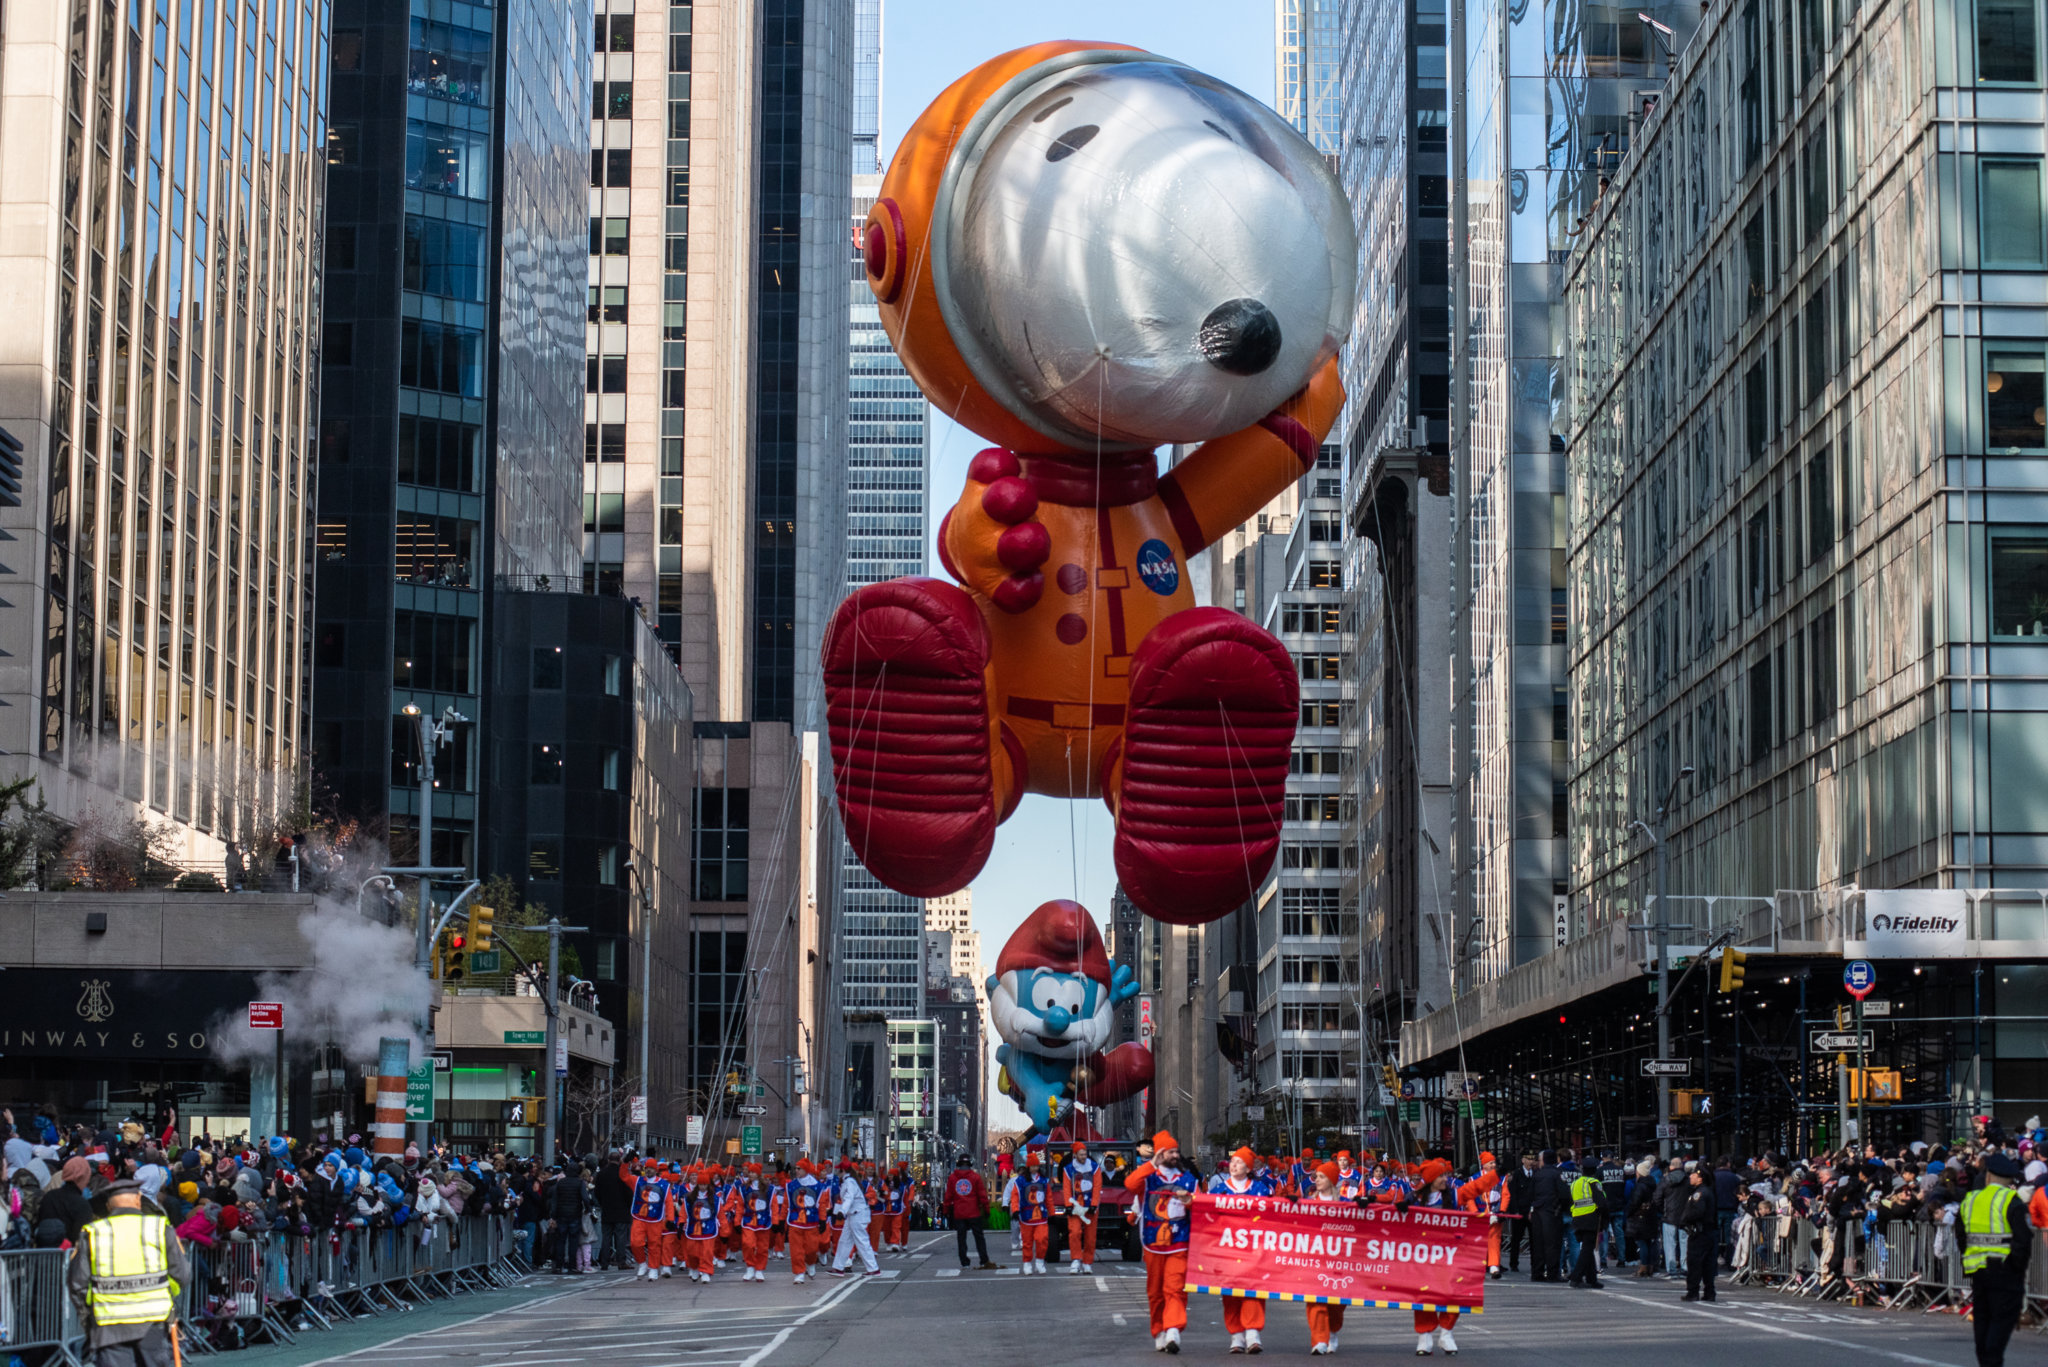 Here are a few fun facts about the Macy’s Thanksgiving Day parade